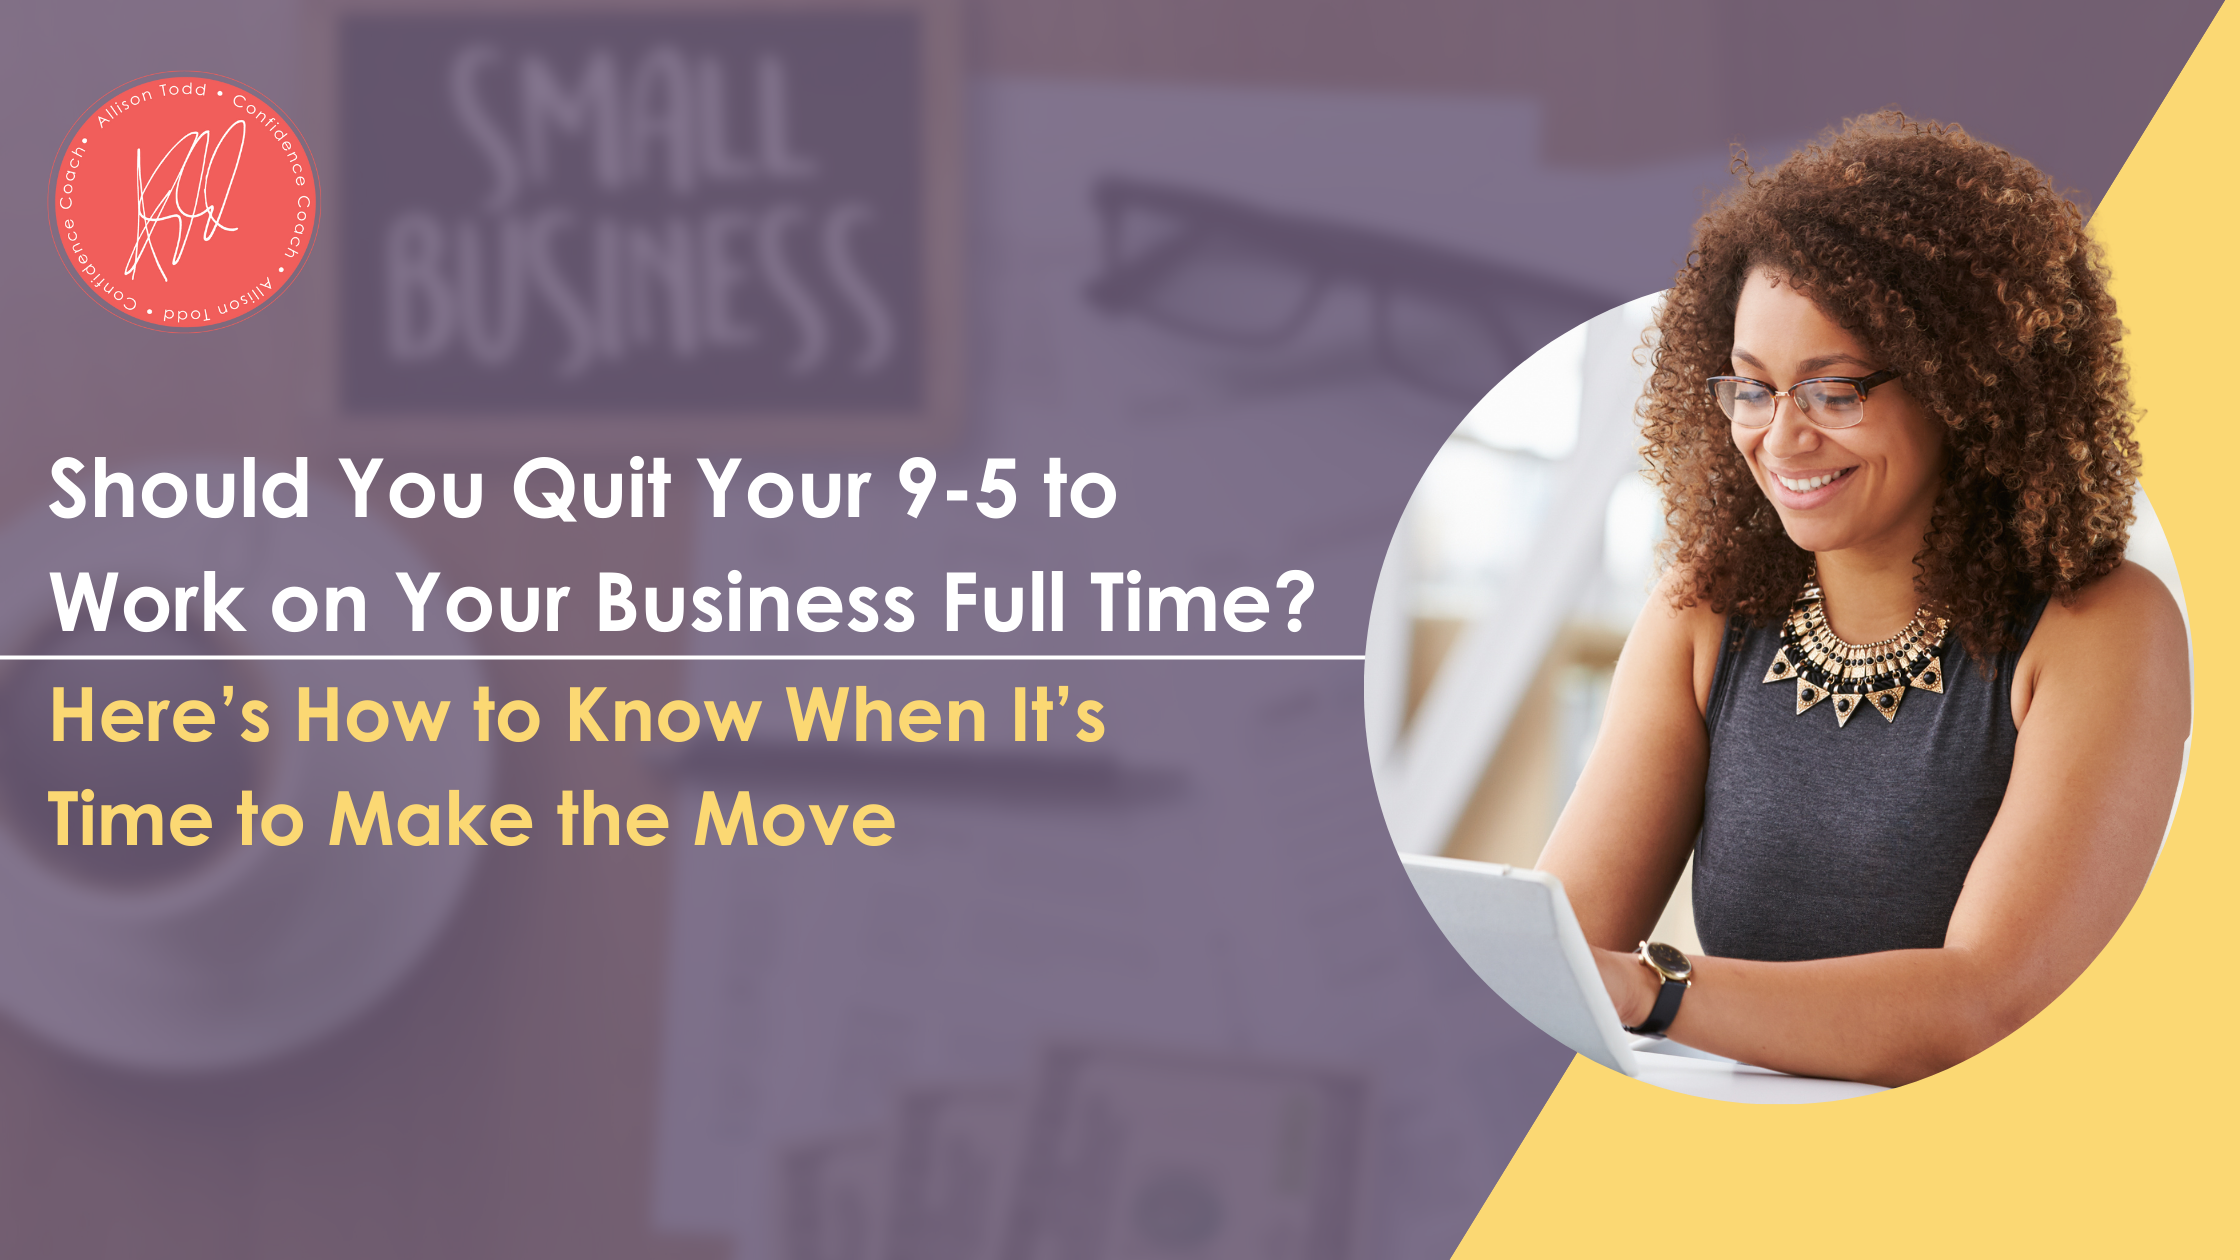 Should You Quit Your 9-5 to Work on Your Business Full Time? Here’s How to Know When It’s Time to Make the Move